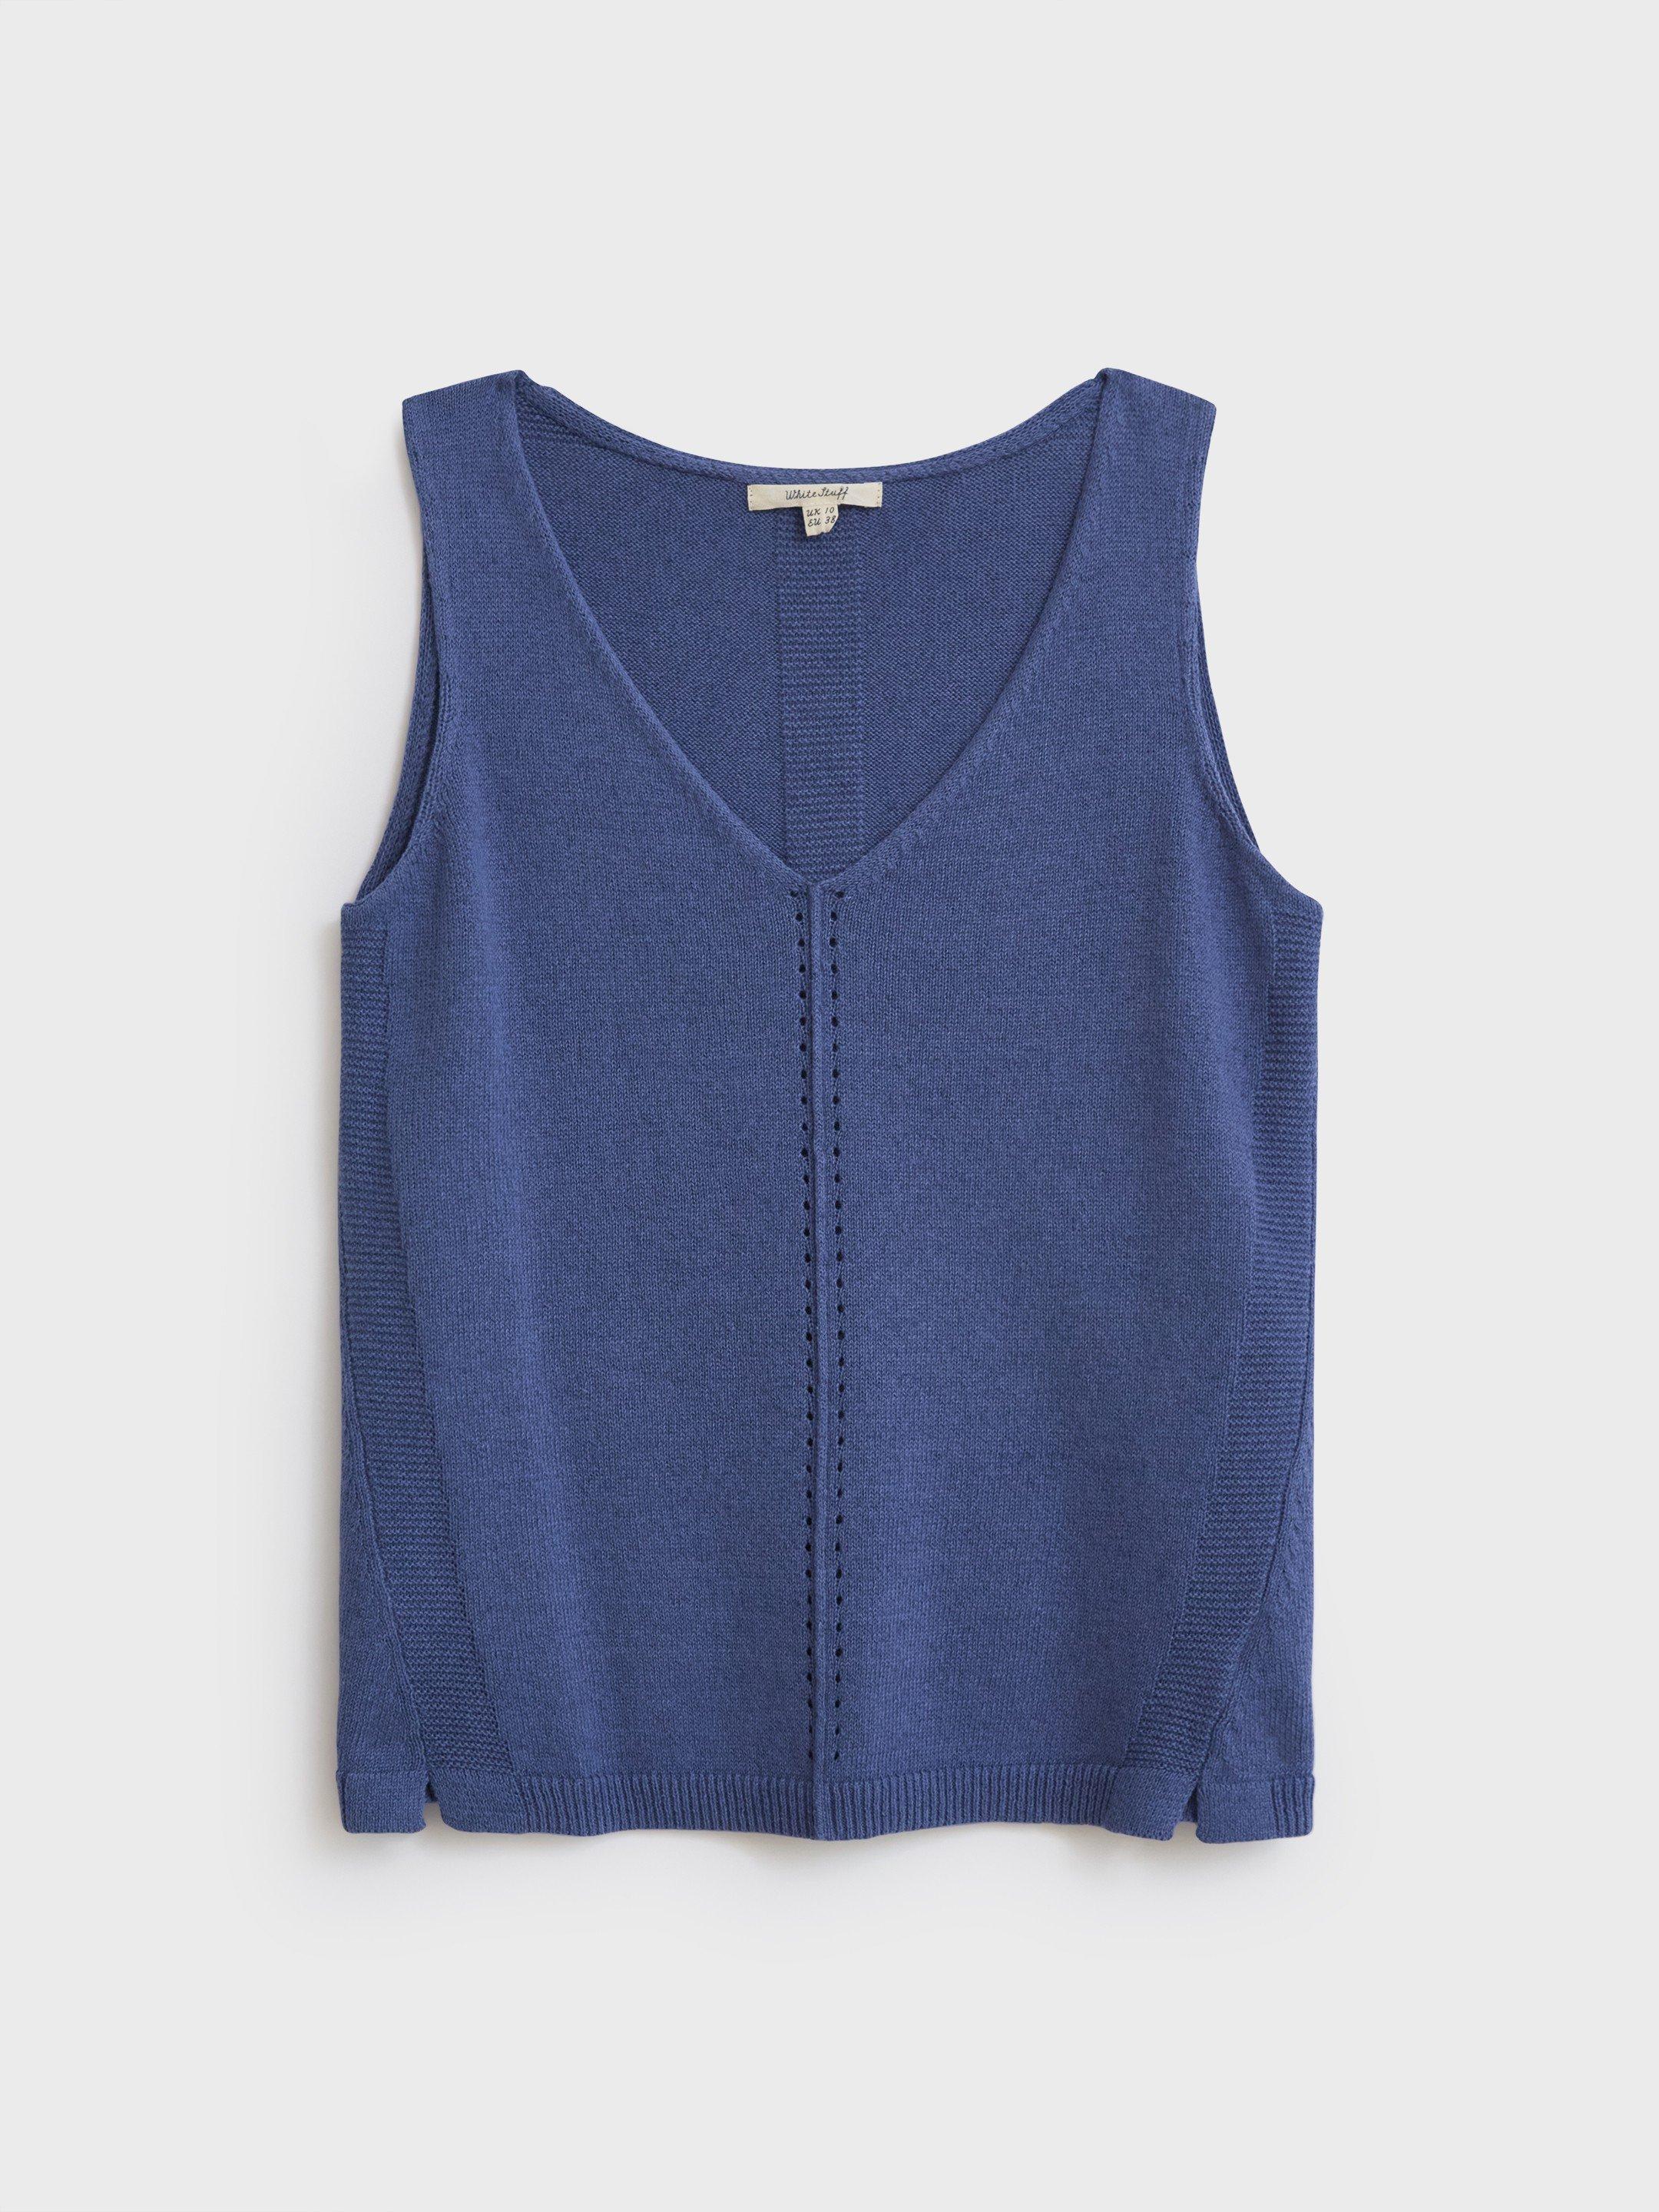 Tallulah Knit Vest in MID BLUE - FLAT FRONT